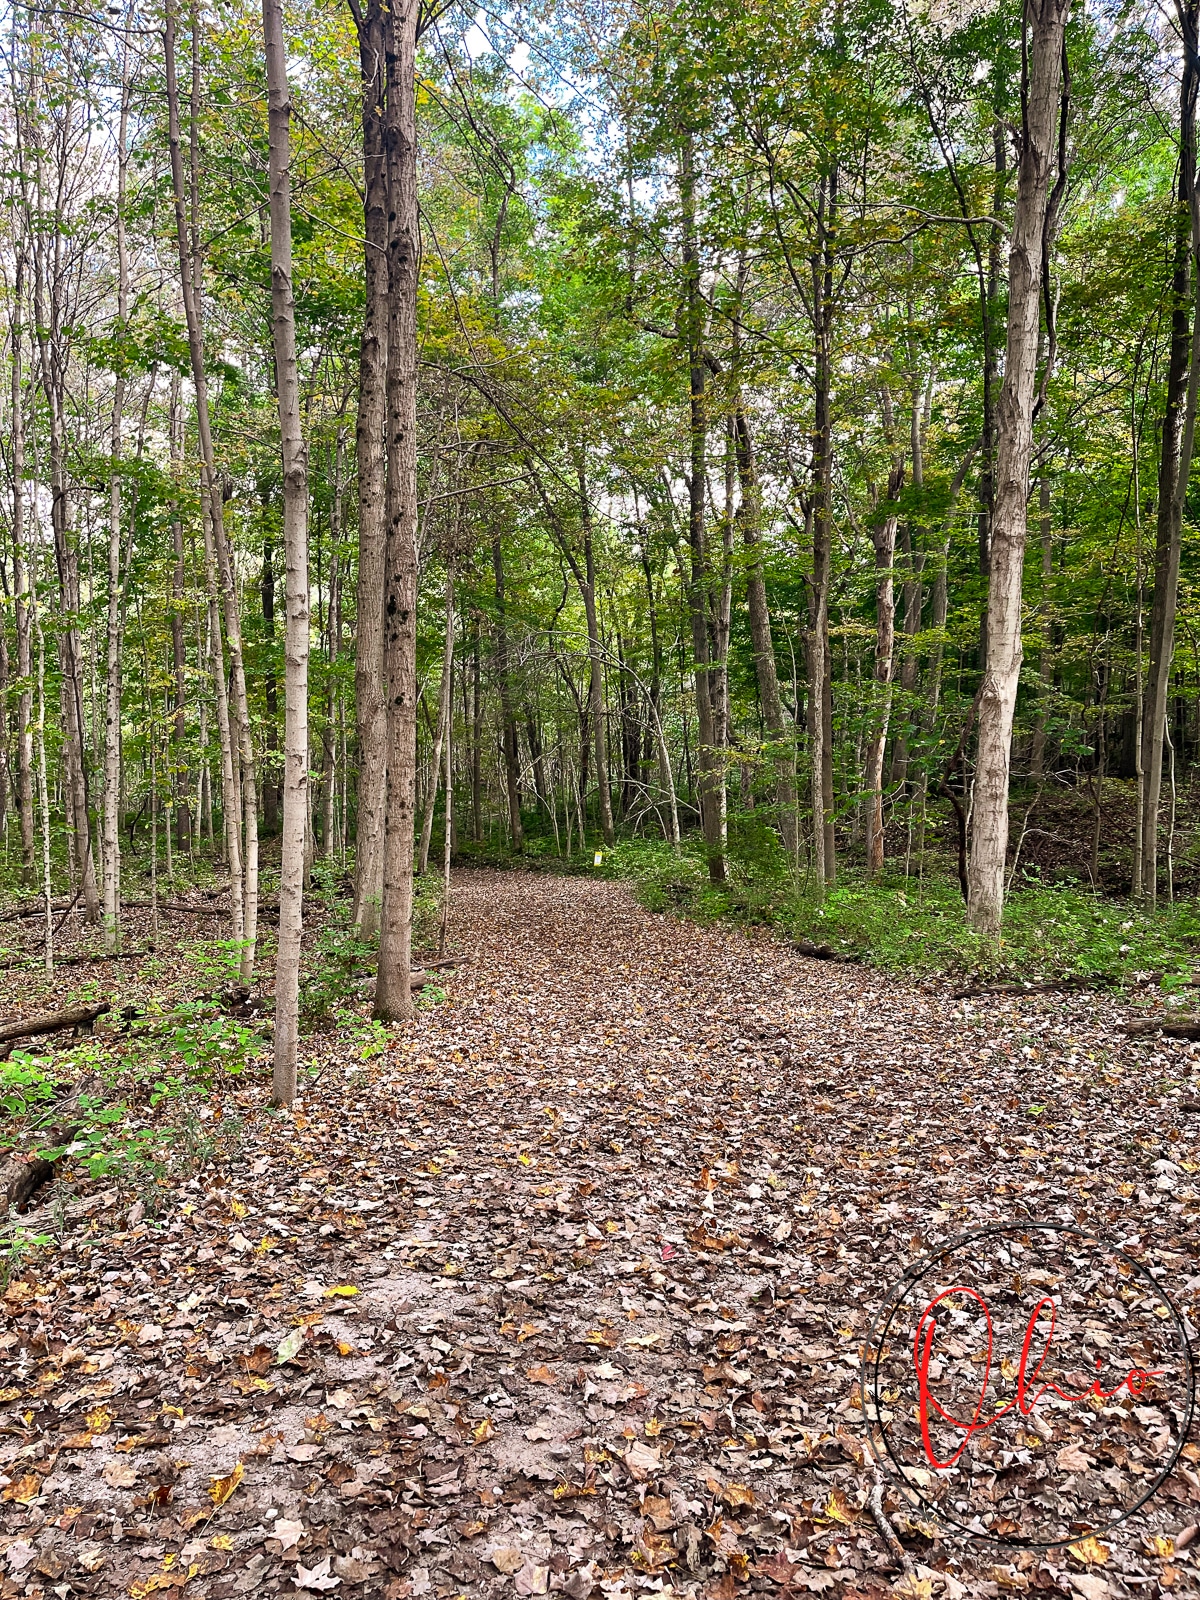 dirt path covered with dead fallen leaves, wooden tree leaves starting to change color and brown tree trunks. Photo credit: Cindy Gordon of VisitOhioToday.com